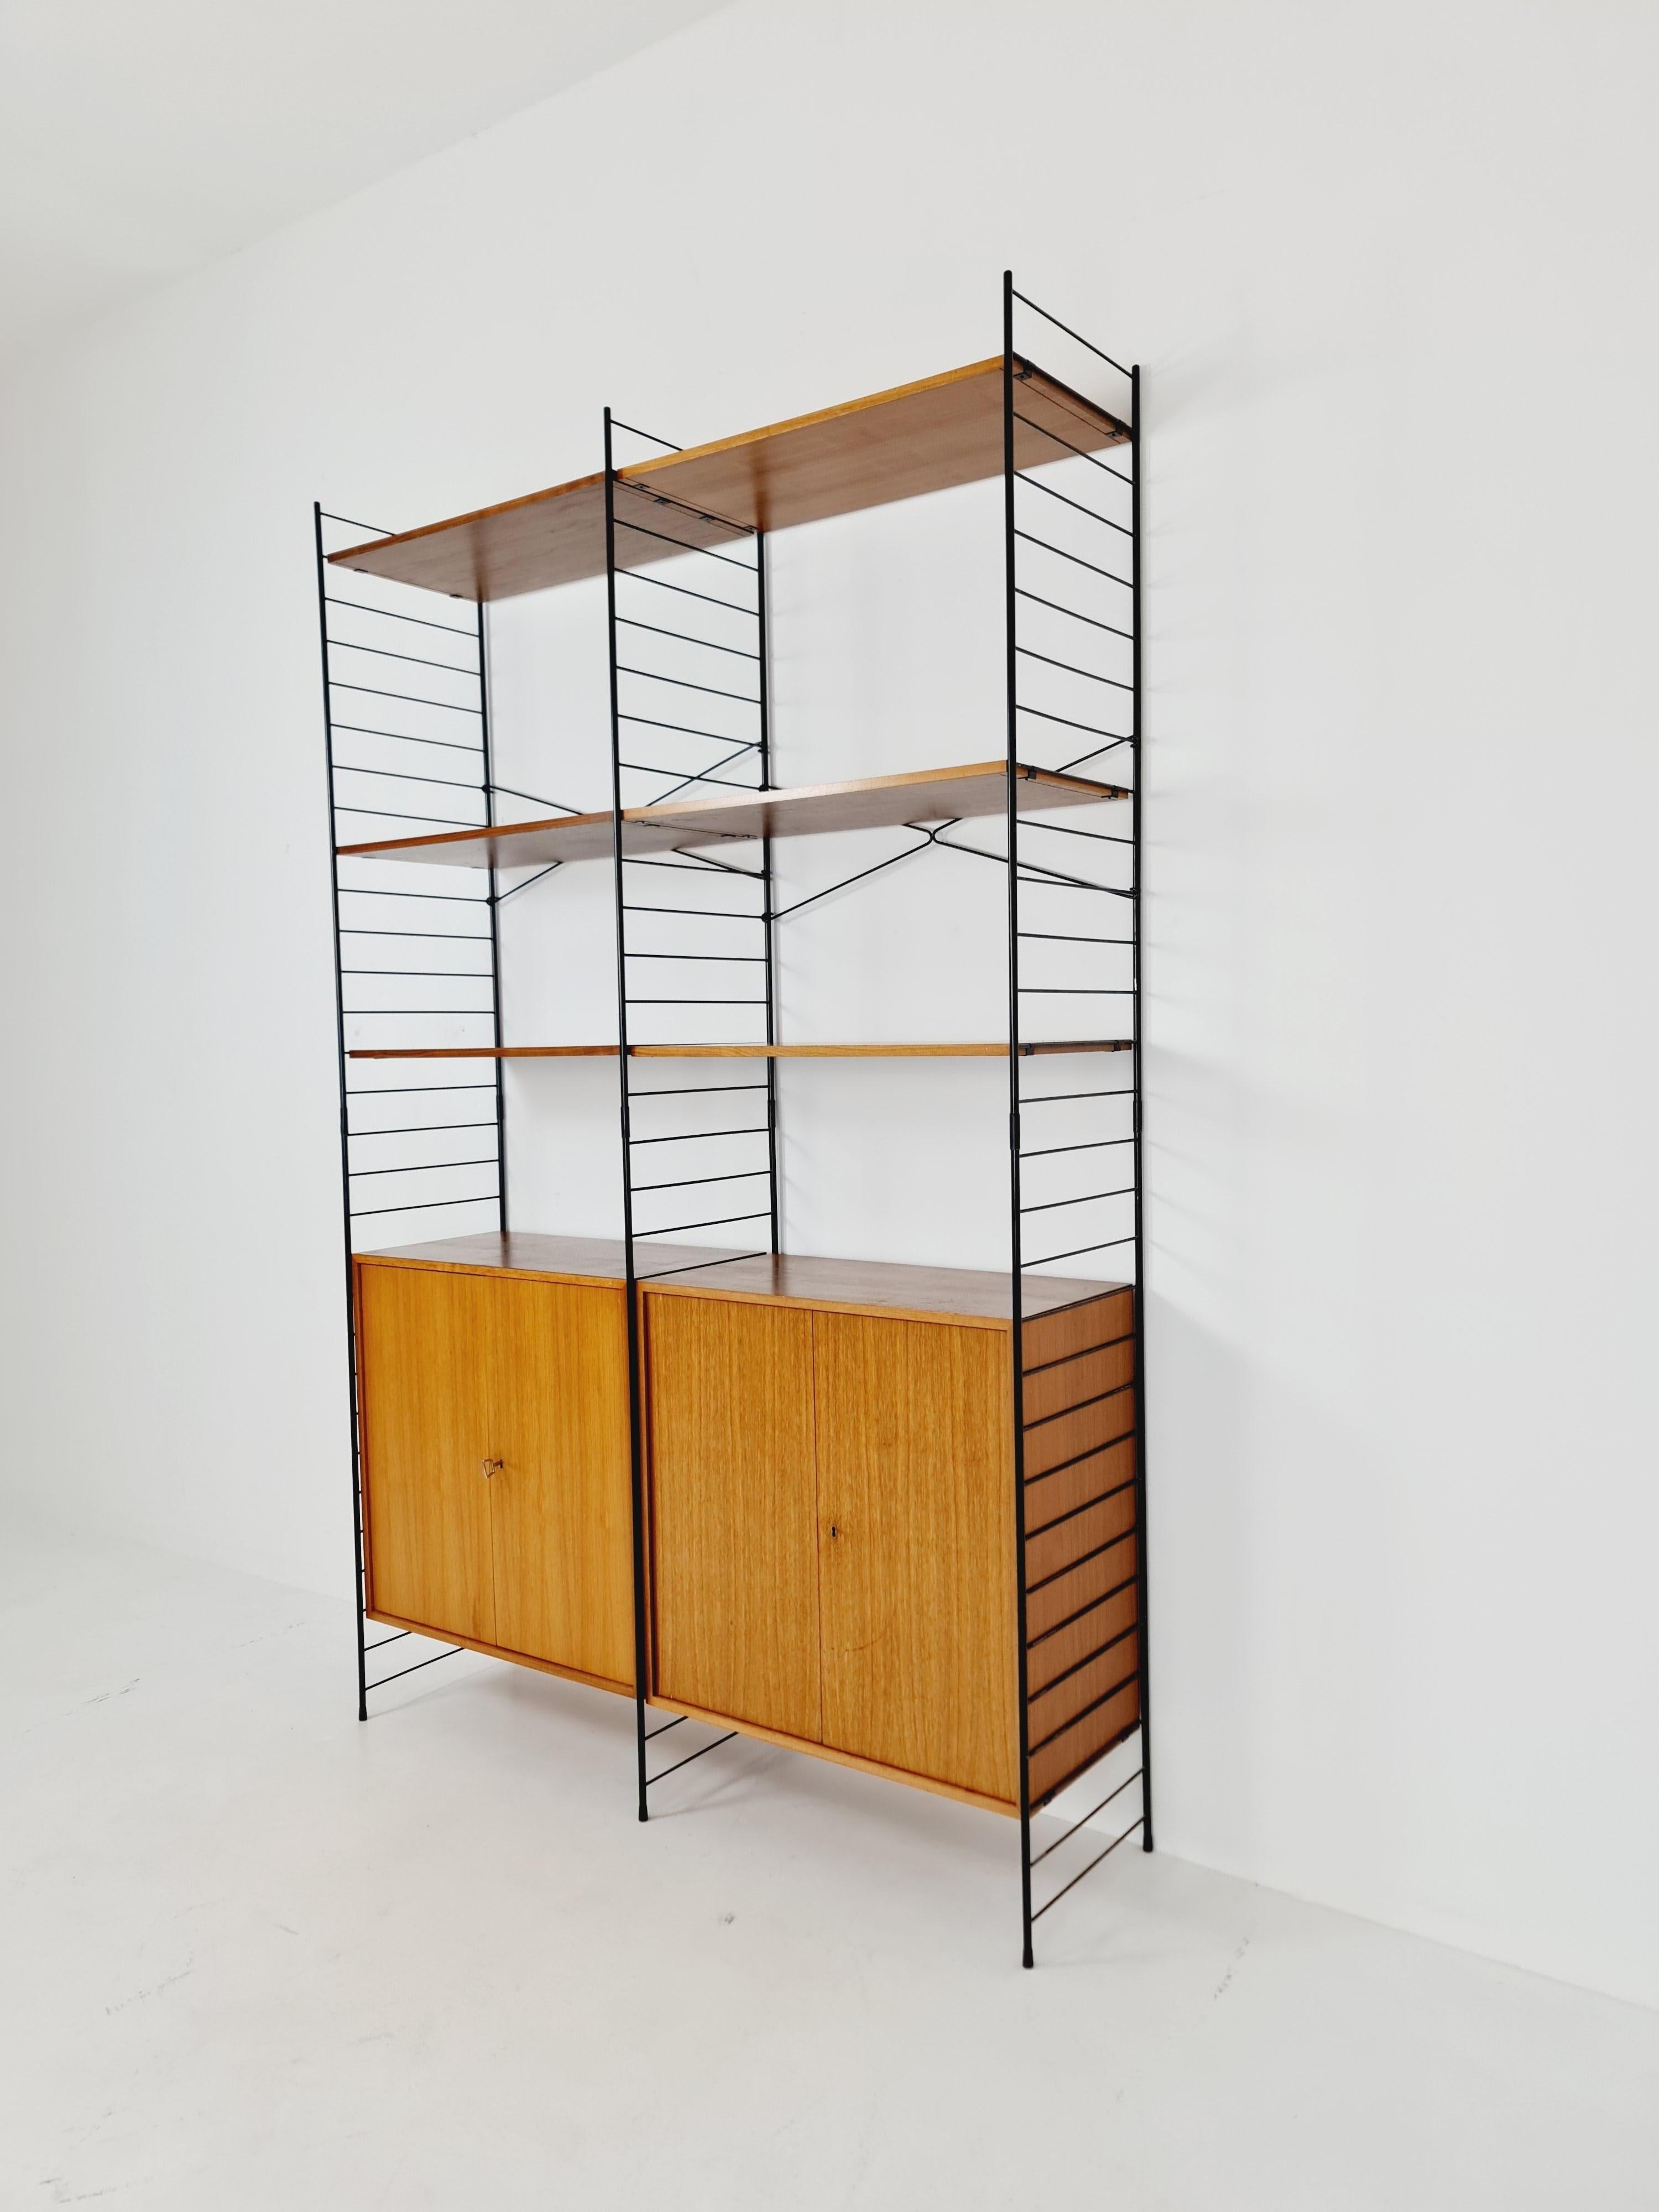 String shelf-system teak by WHB Germany, 1950s

Measurements:
Height : 225 cm
Width : 145 cm 
Depth : 40 cm 

Please inquiry for prices to your country before buying. 

A wooden crate may be used for intercontinental shipments for maximum